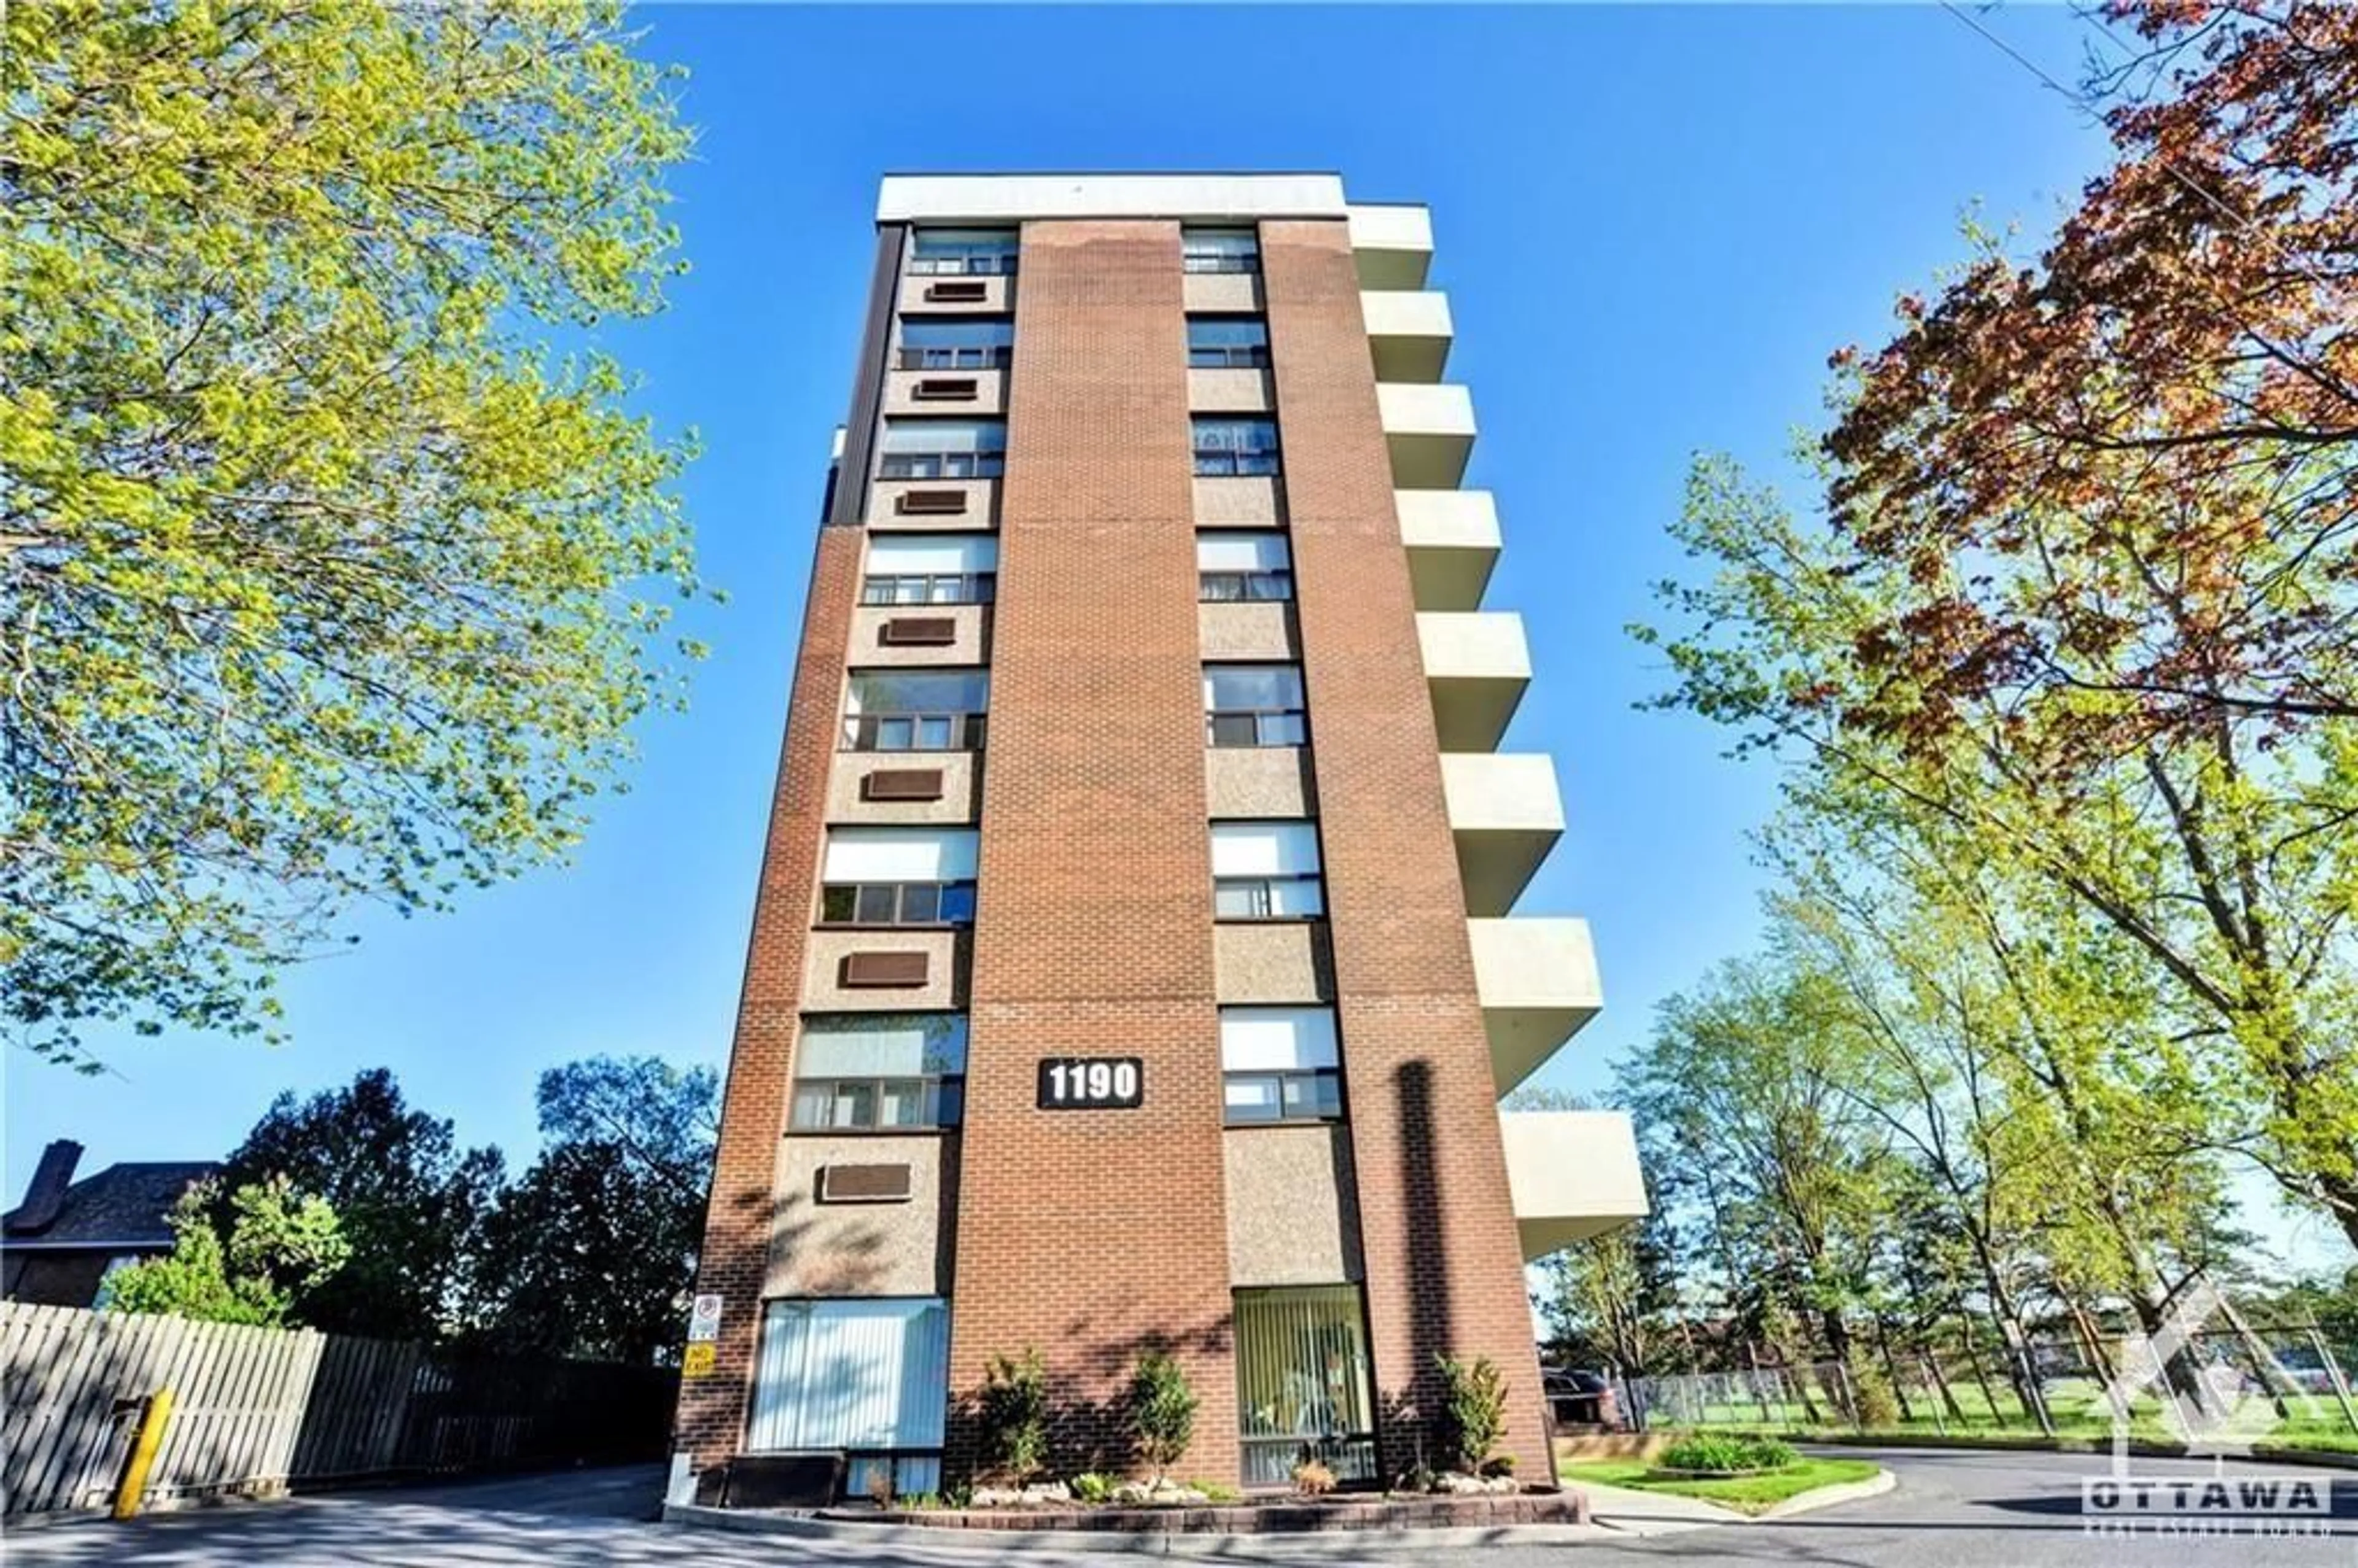 A pic from exterior of the house or condo for 1190 RICHMOND Rd #703, Ottawa Ontario K2B 8J3